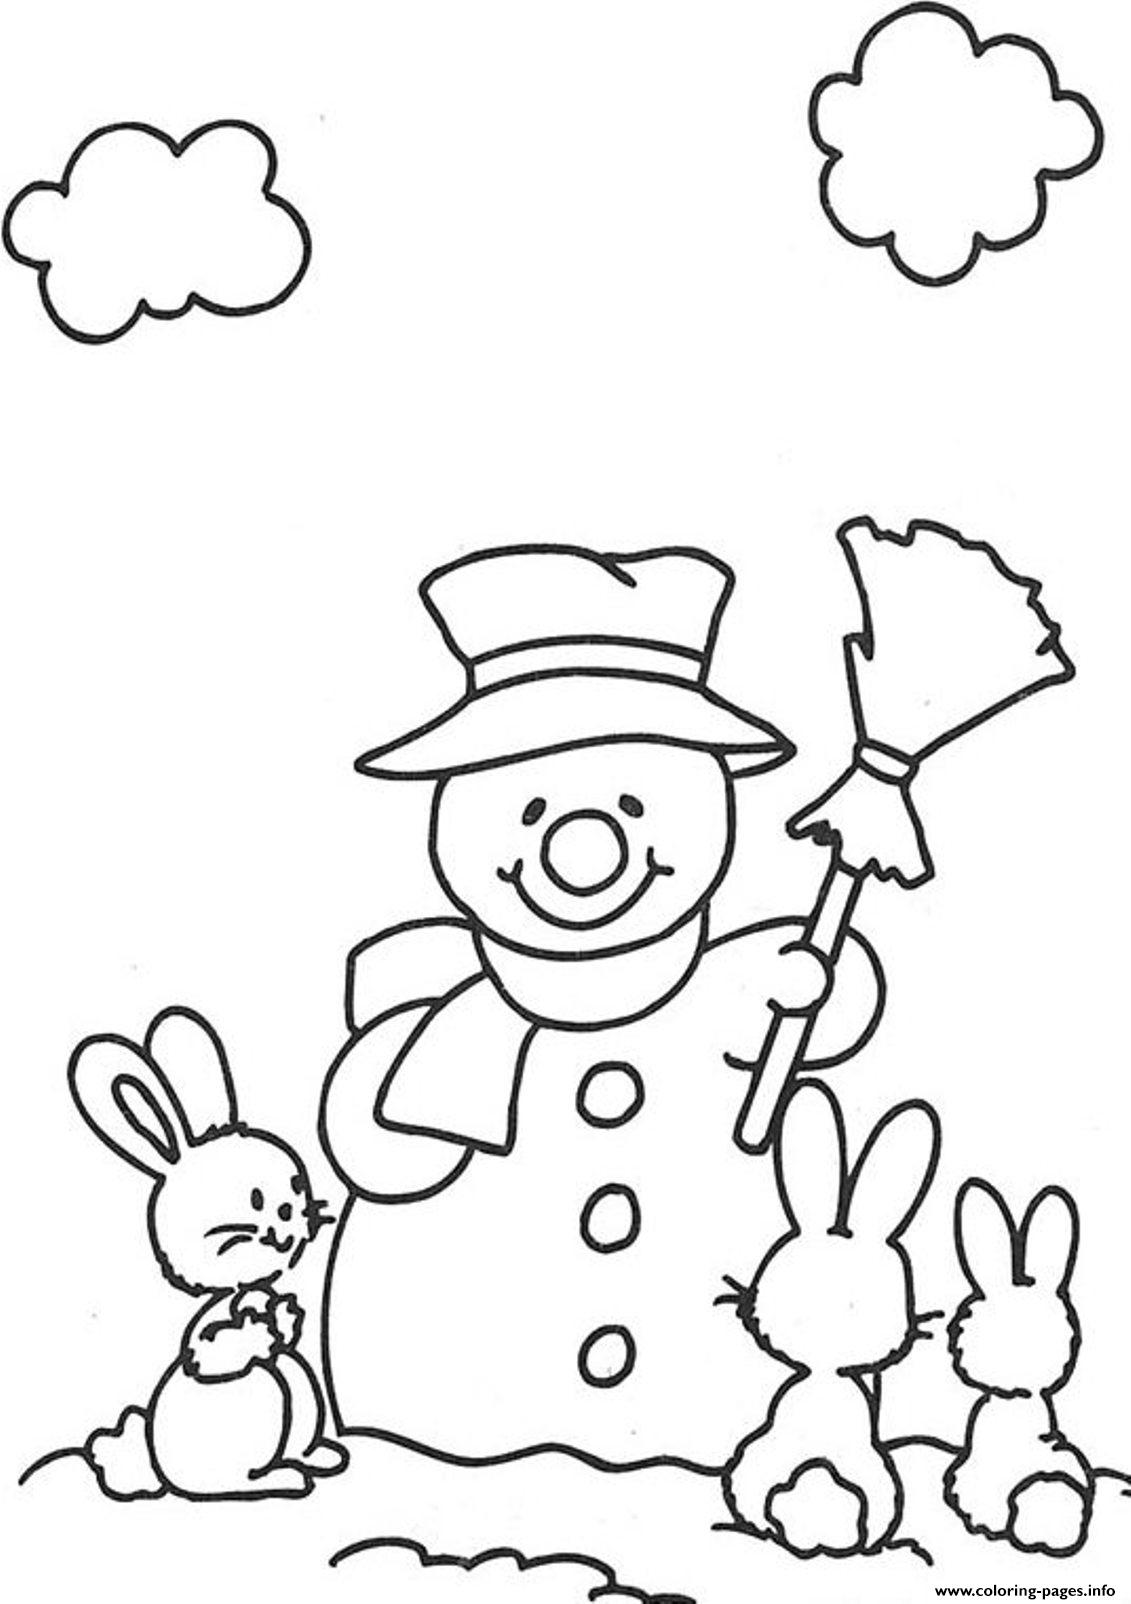 Rabbits And Snowman S1bea coloring